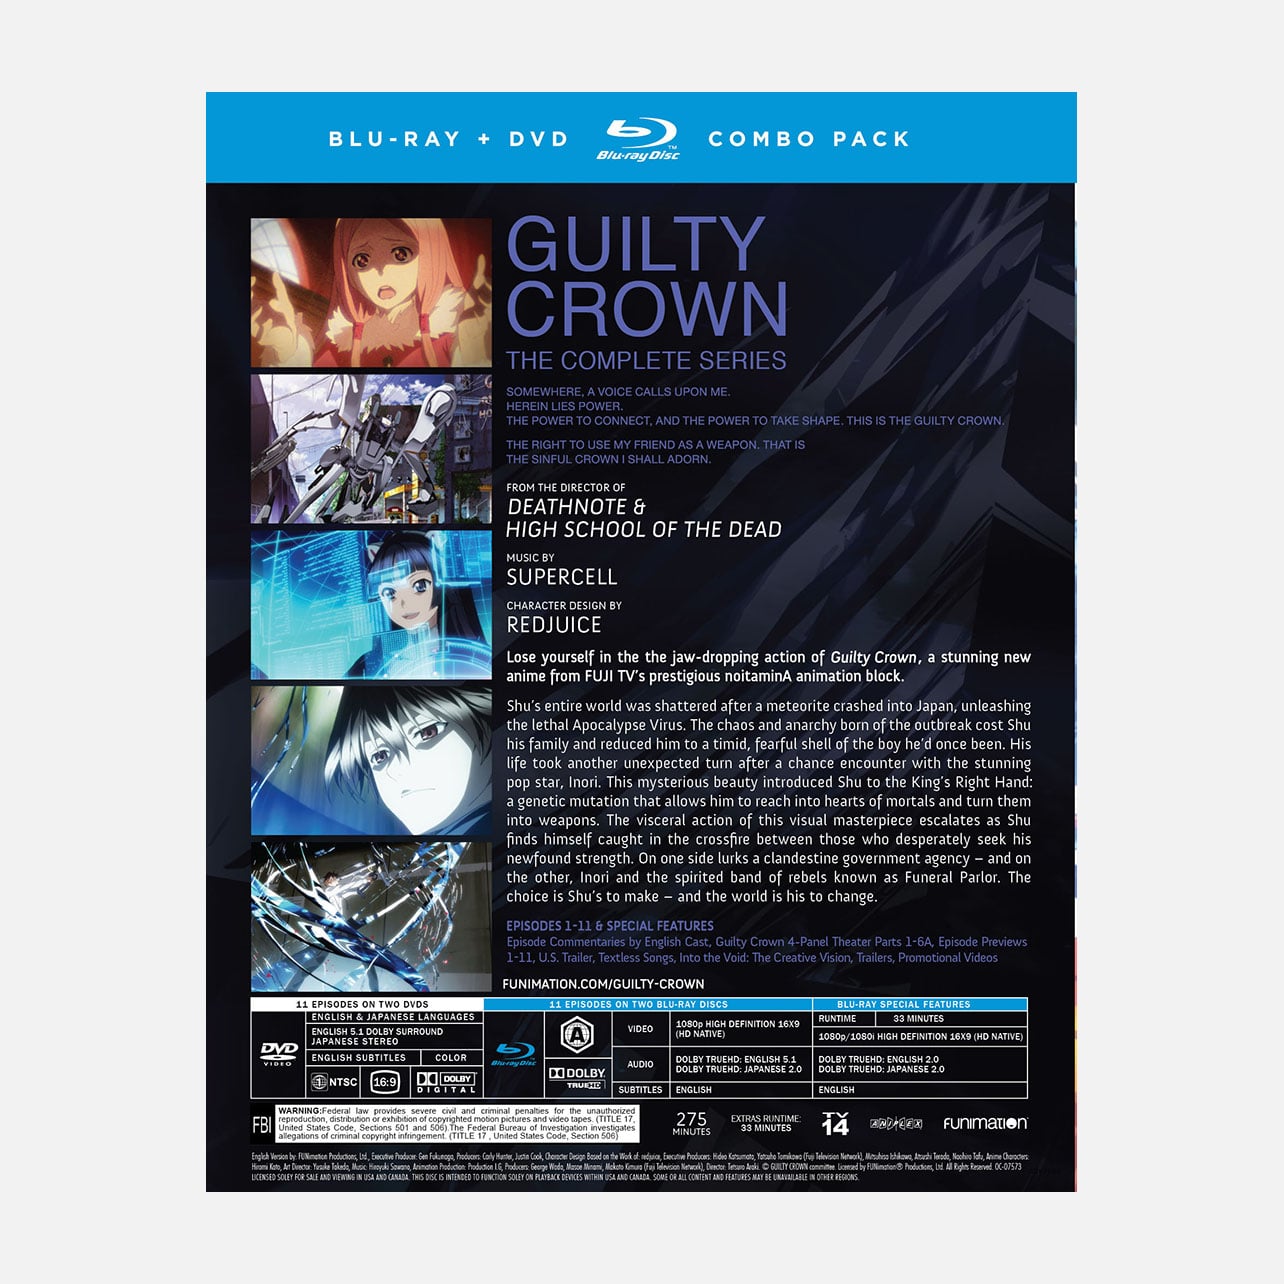 Guilty Crown - The Complete Series - Blu-ray + DVD image count 1